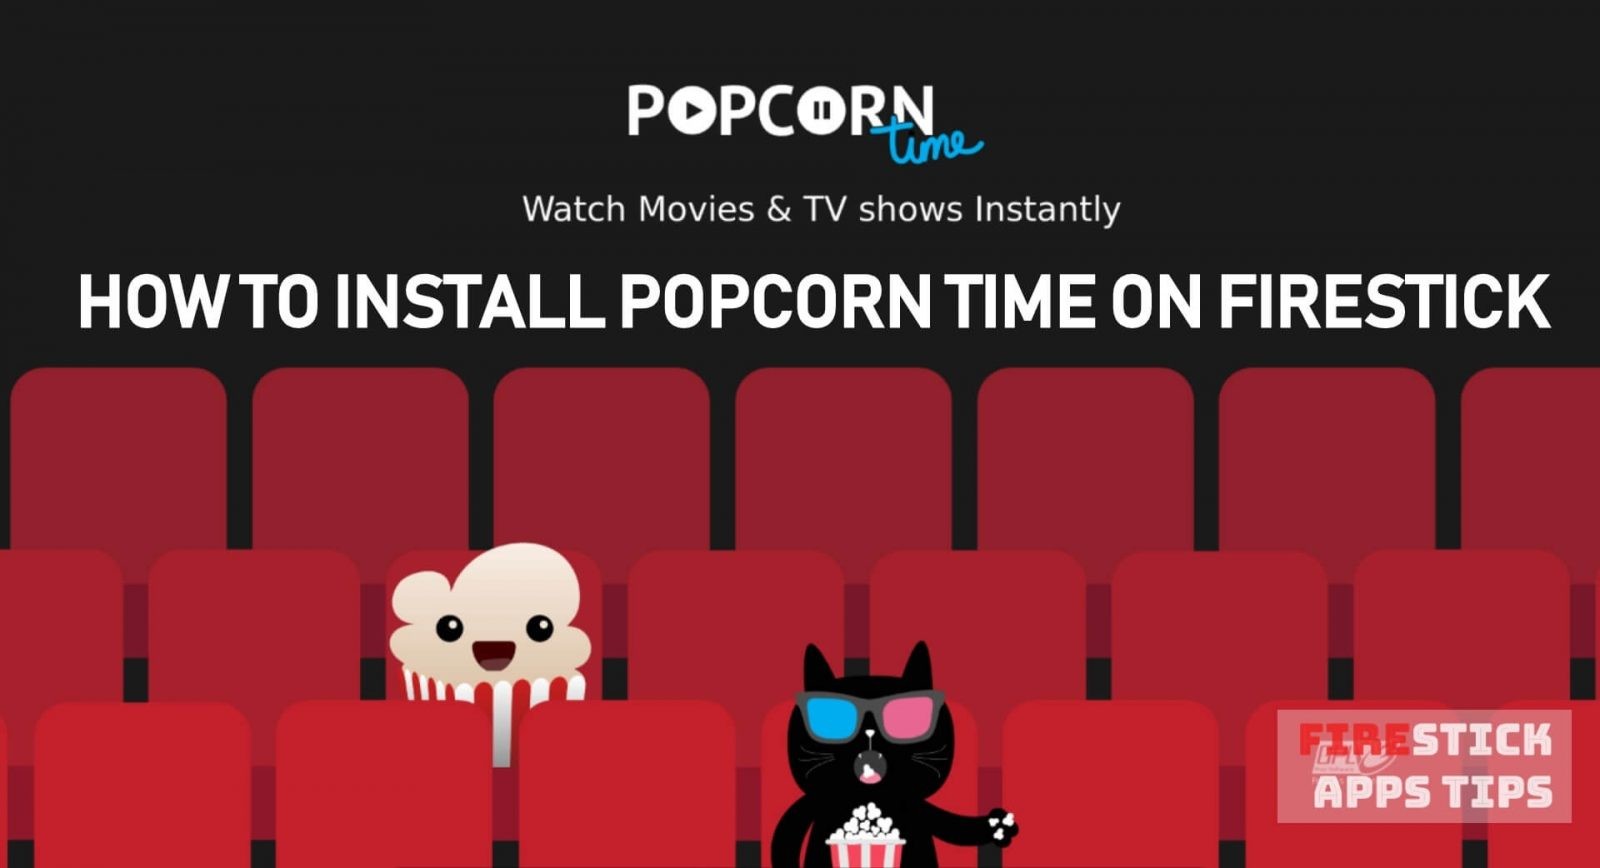 How to Install Popcorn Time on Firestick / Fire TV